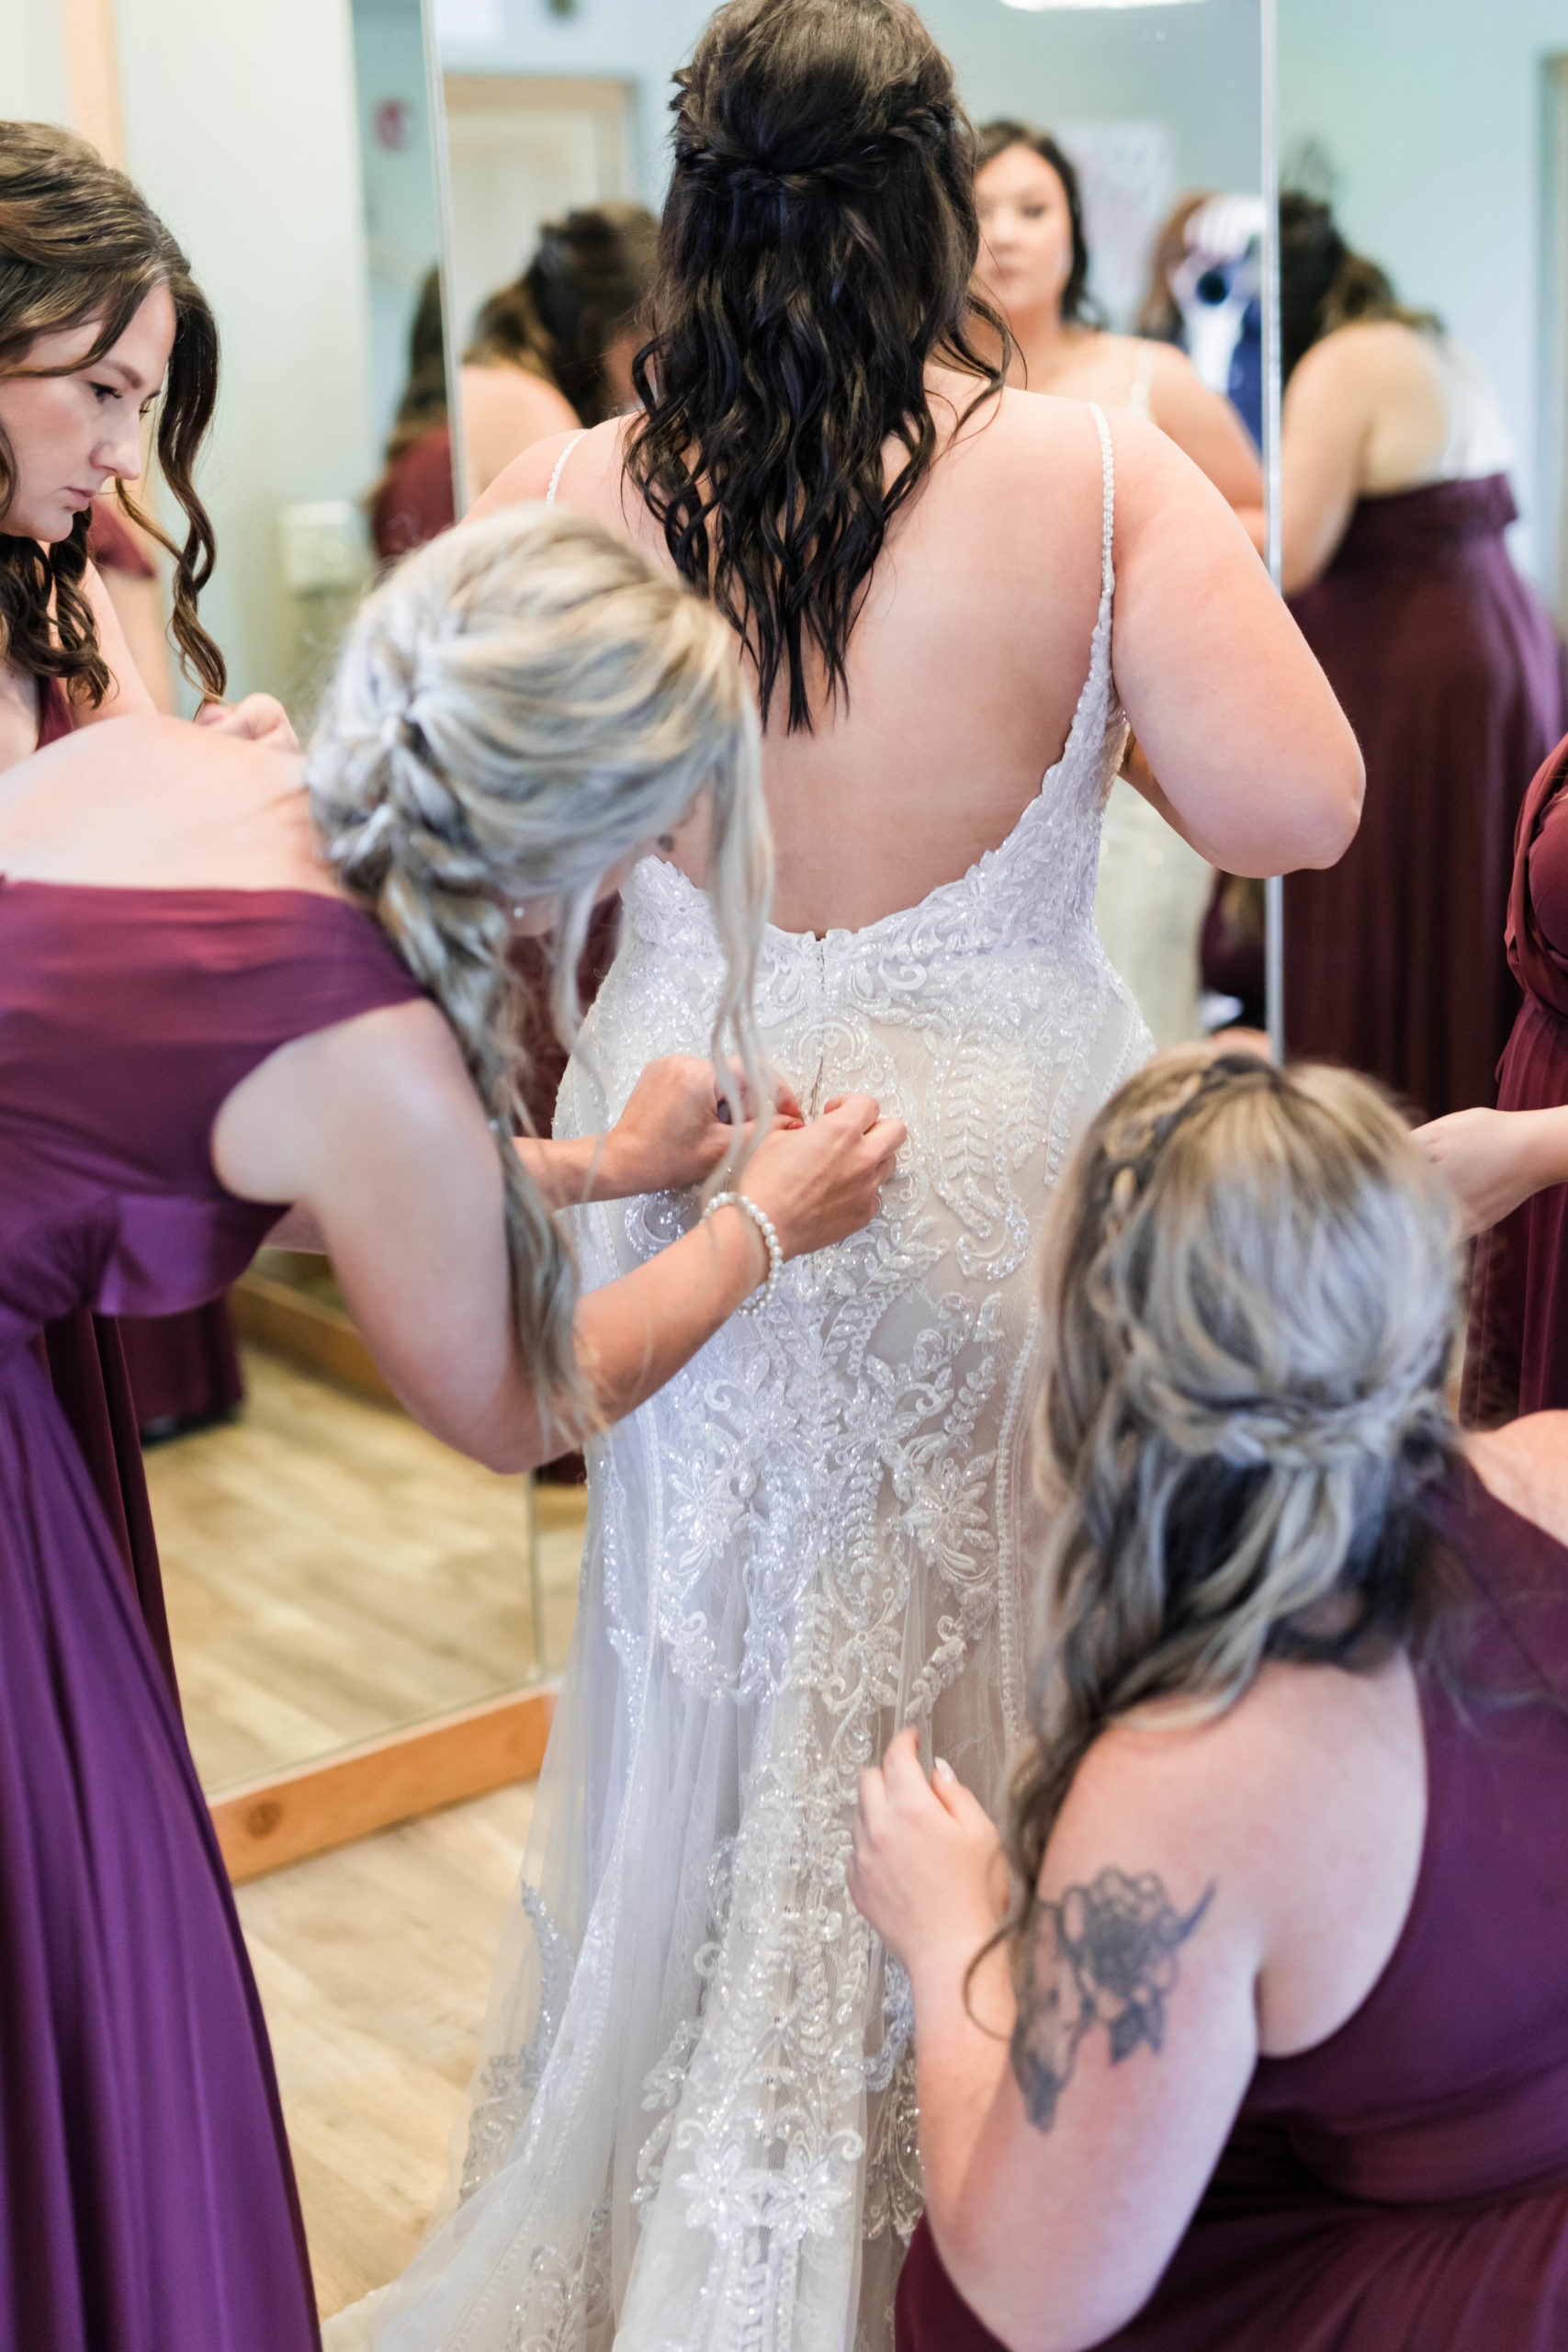 bride getting buttoned into wedding dress